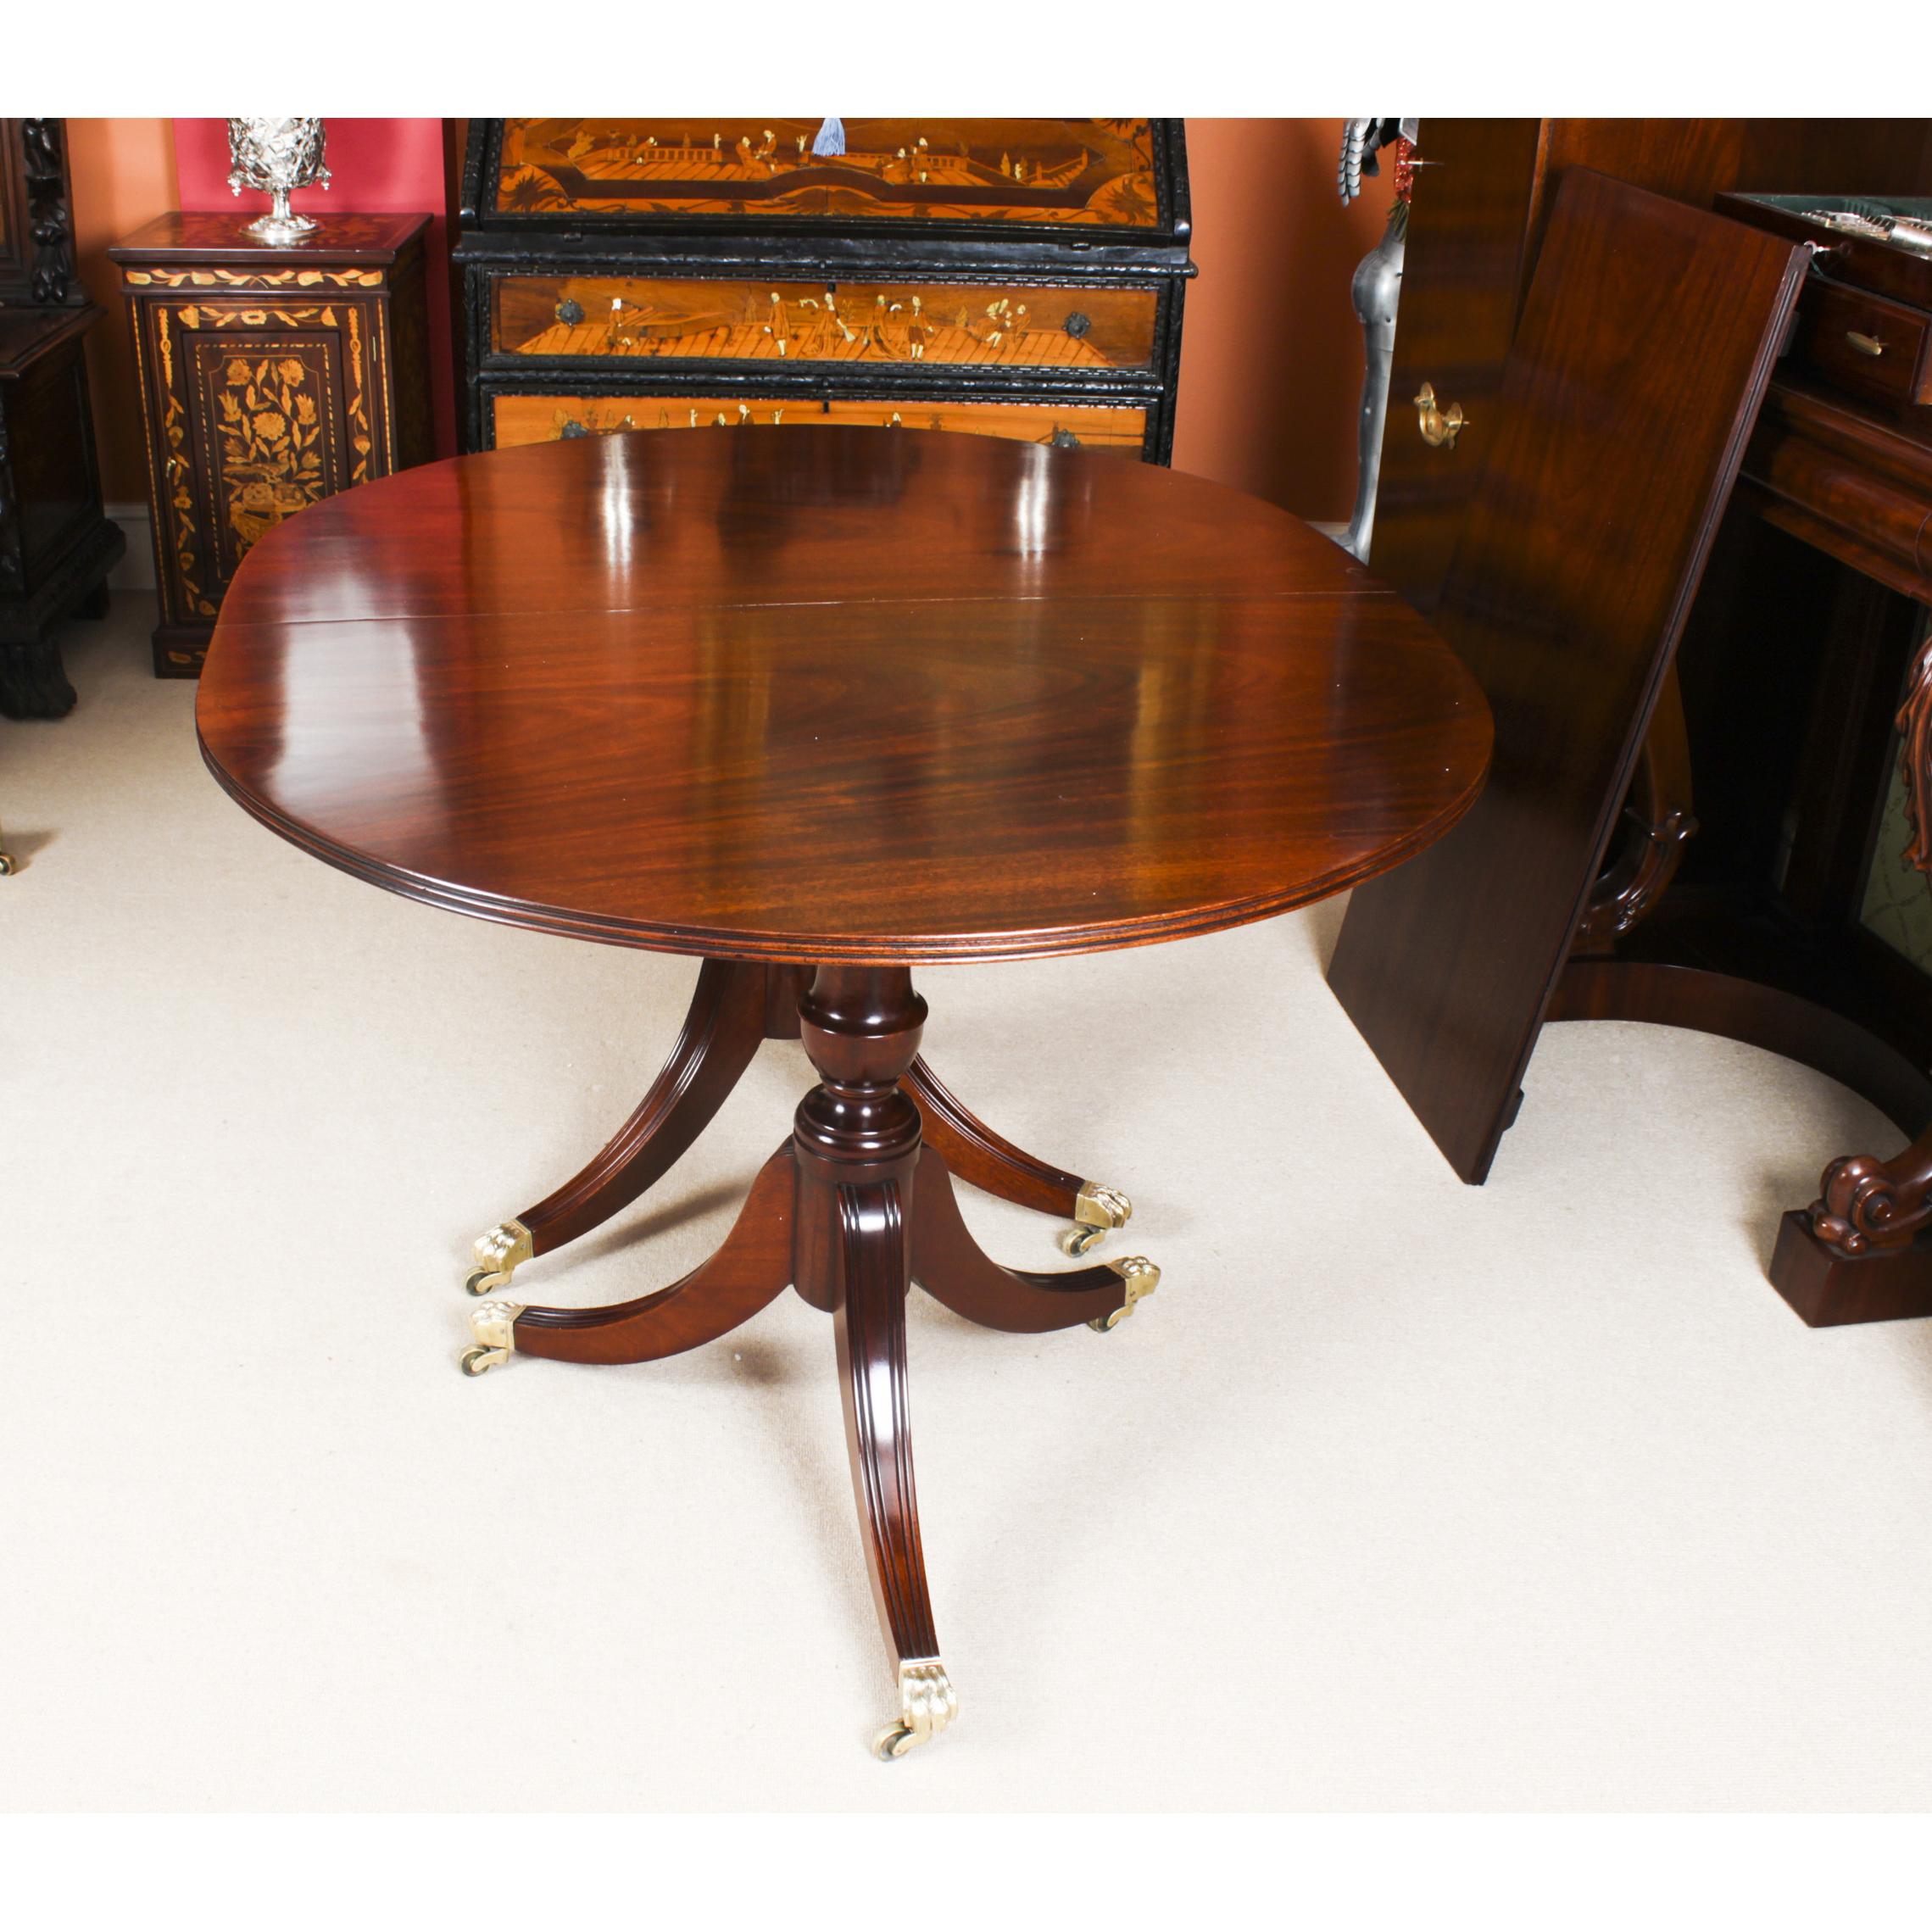 Mahogany Antique Twin Pillar Regency Dining Table 19th C & 6 Chairs by Tilman